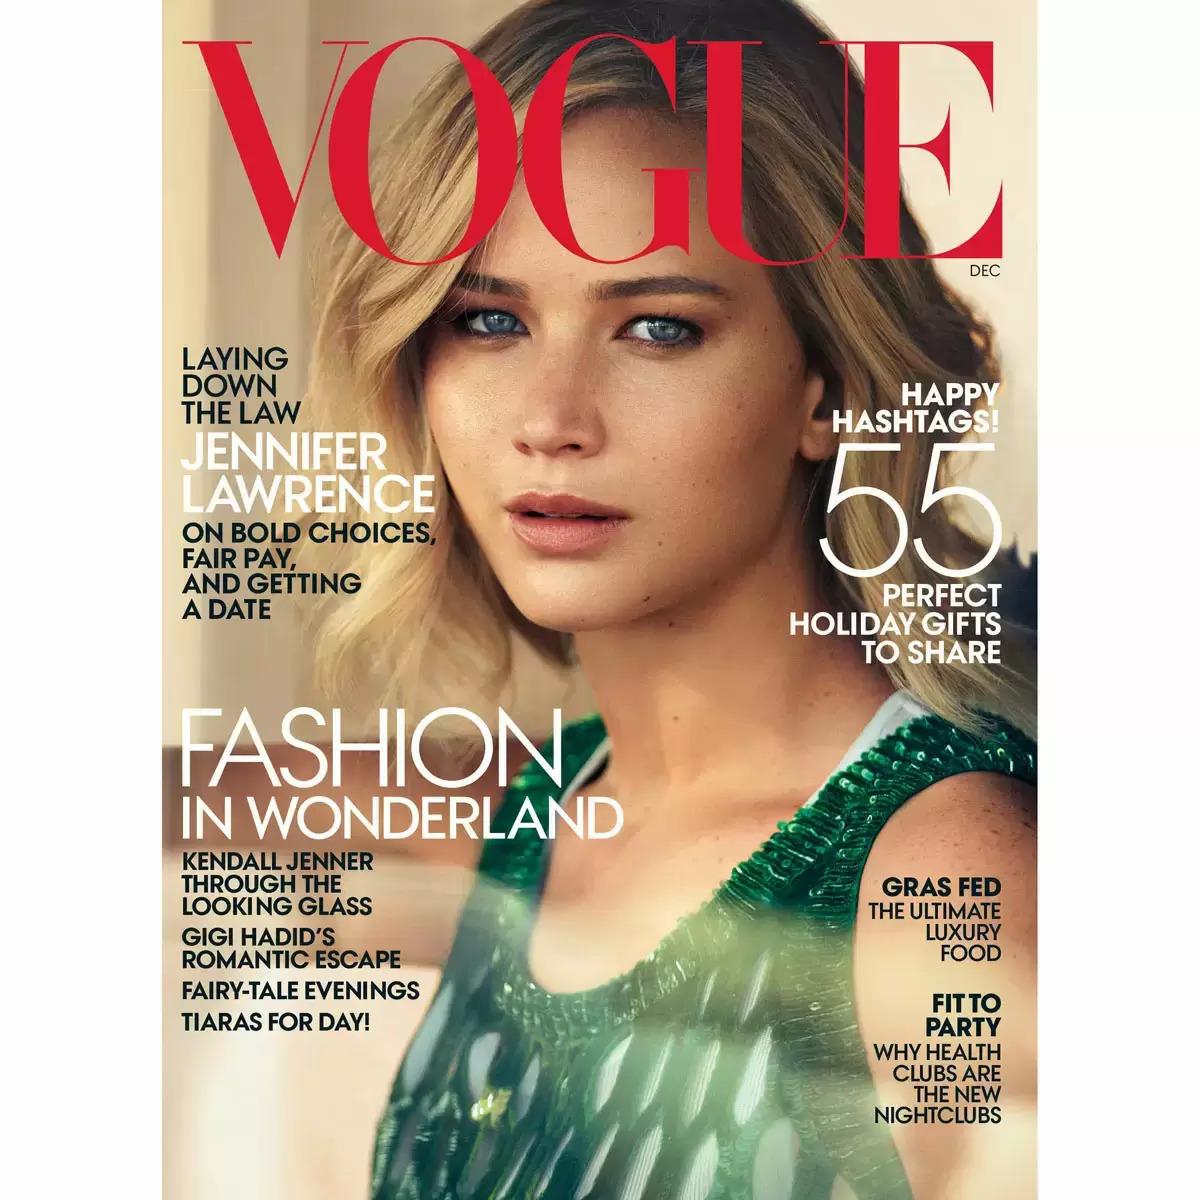 Vogue Magazine 2 Year Subscription for Free